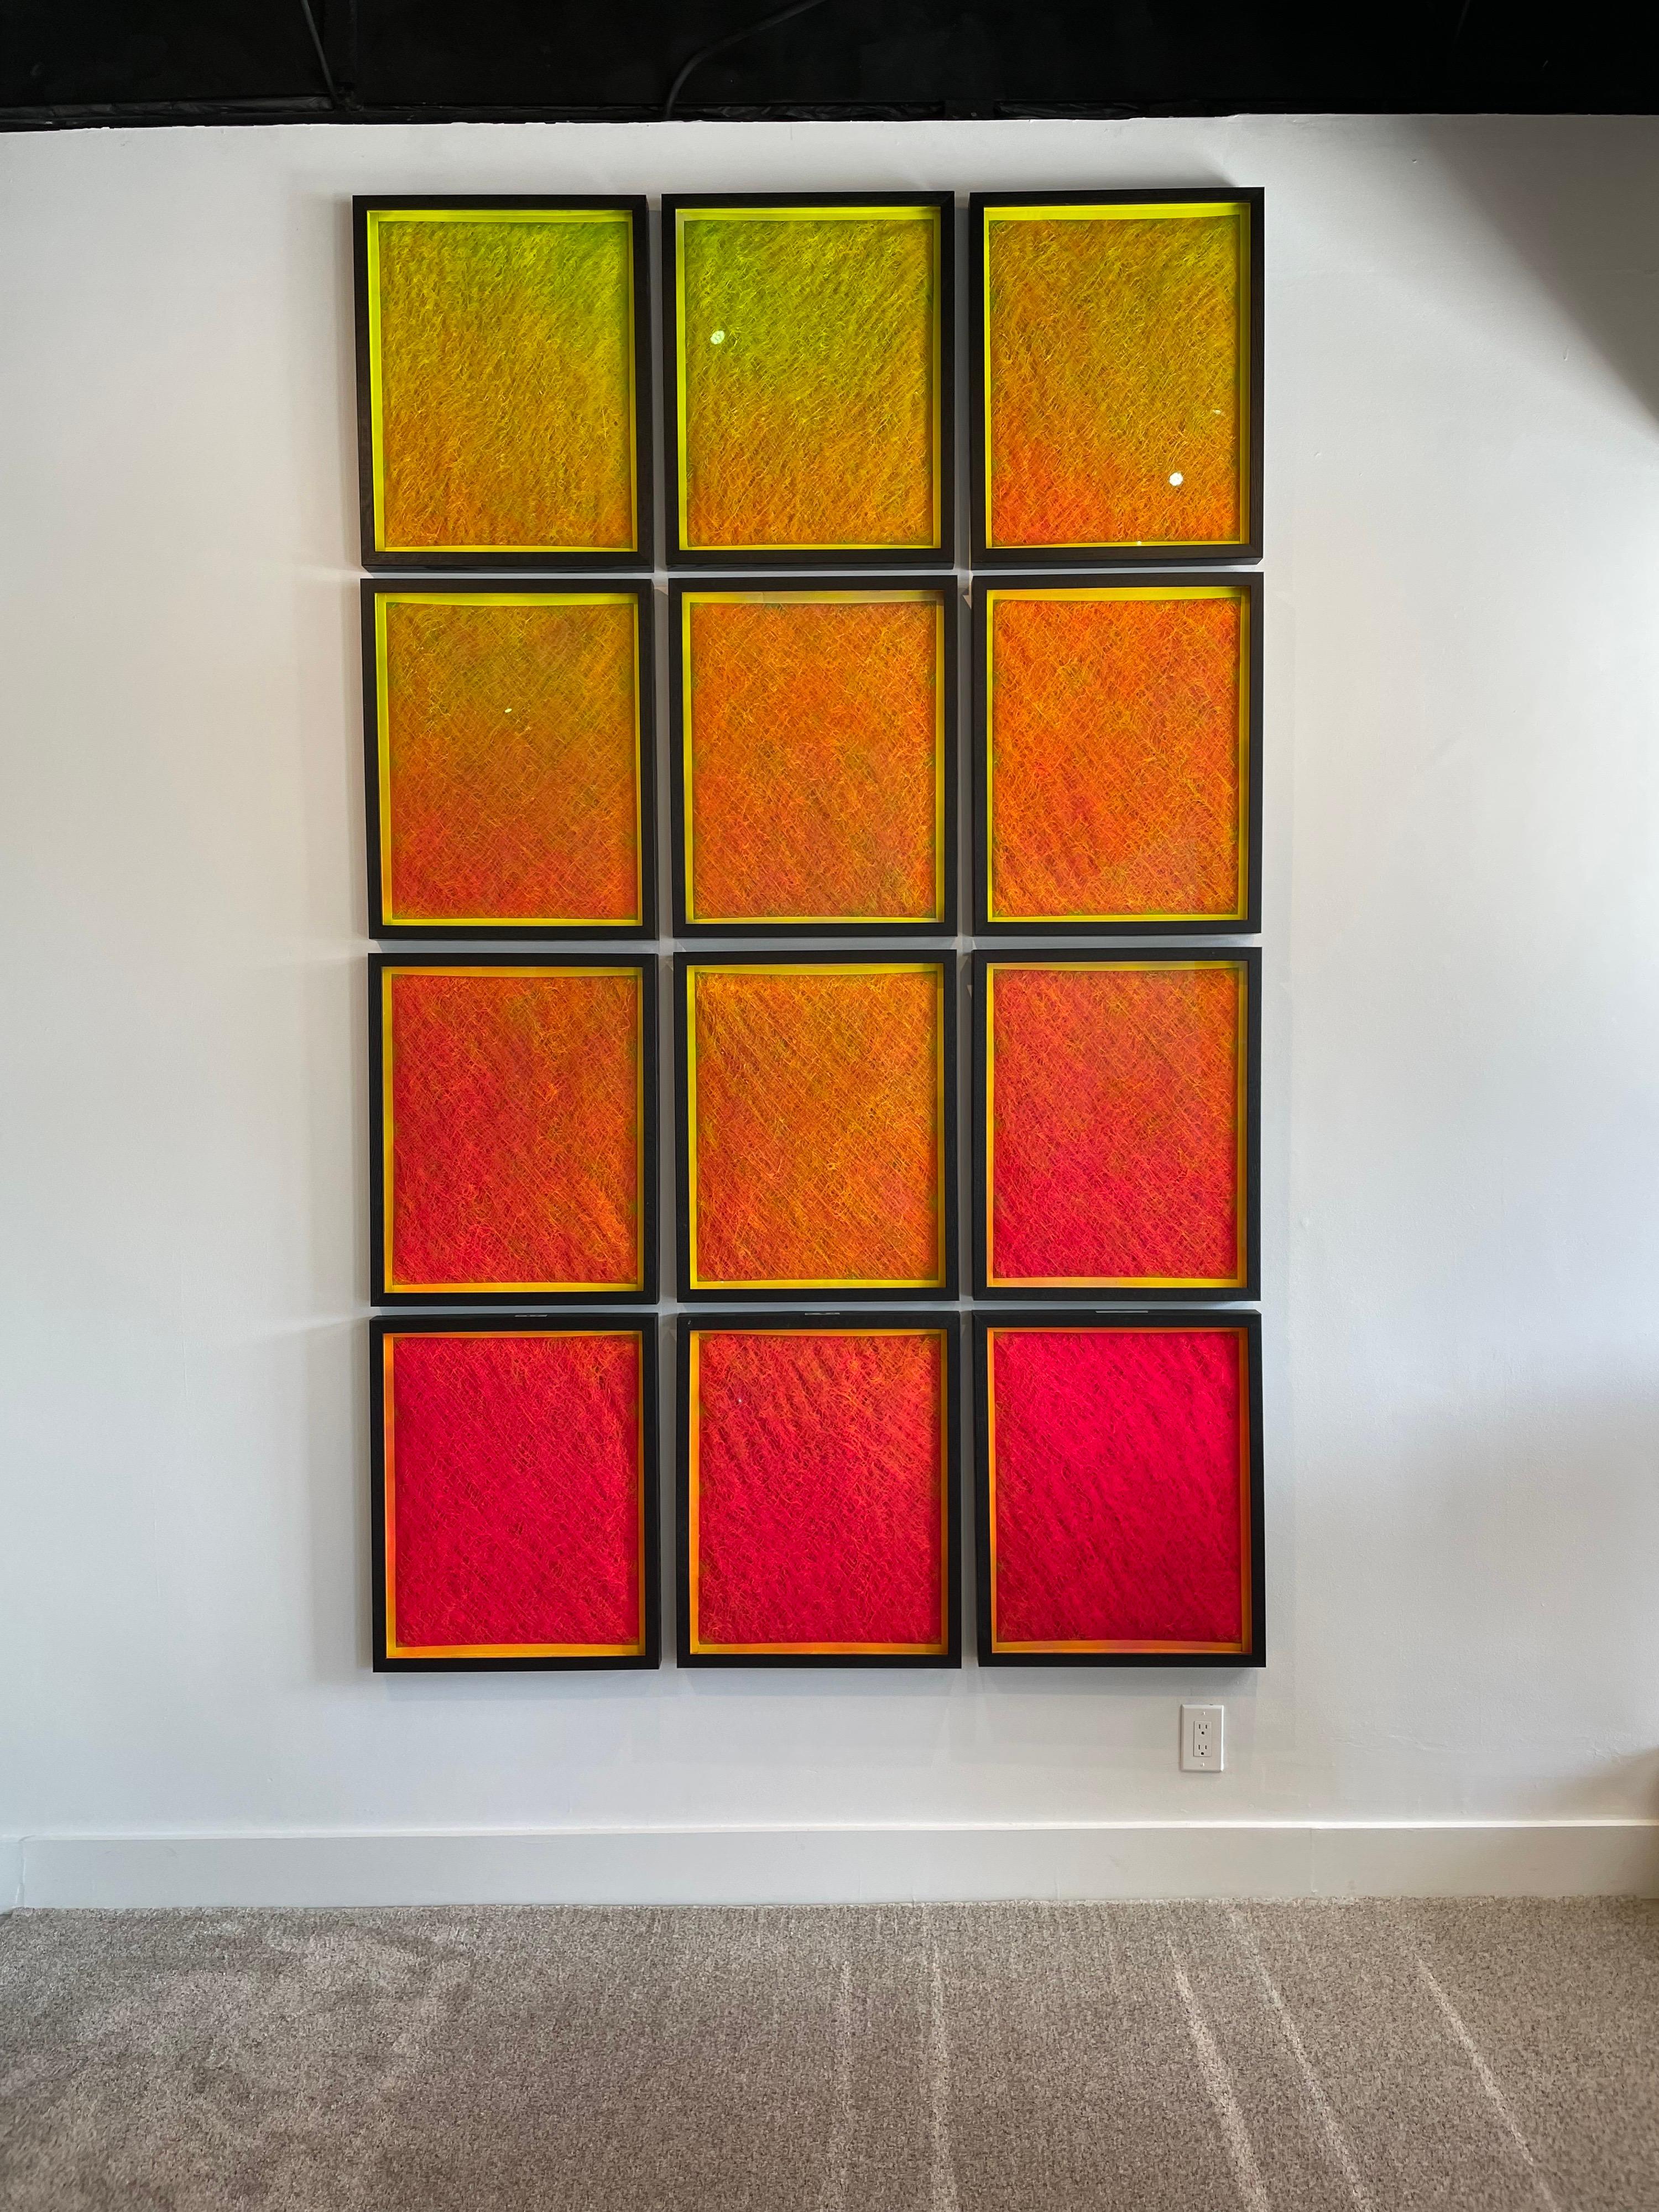 This is a MONUMENTAL art installation comprised of 12 unique framed painted air filters in a continuous color formation by Spanish artist/painter, Francisco Franco. Completely versatile in its options for displaying this arrangement, can be split in